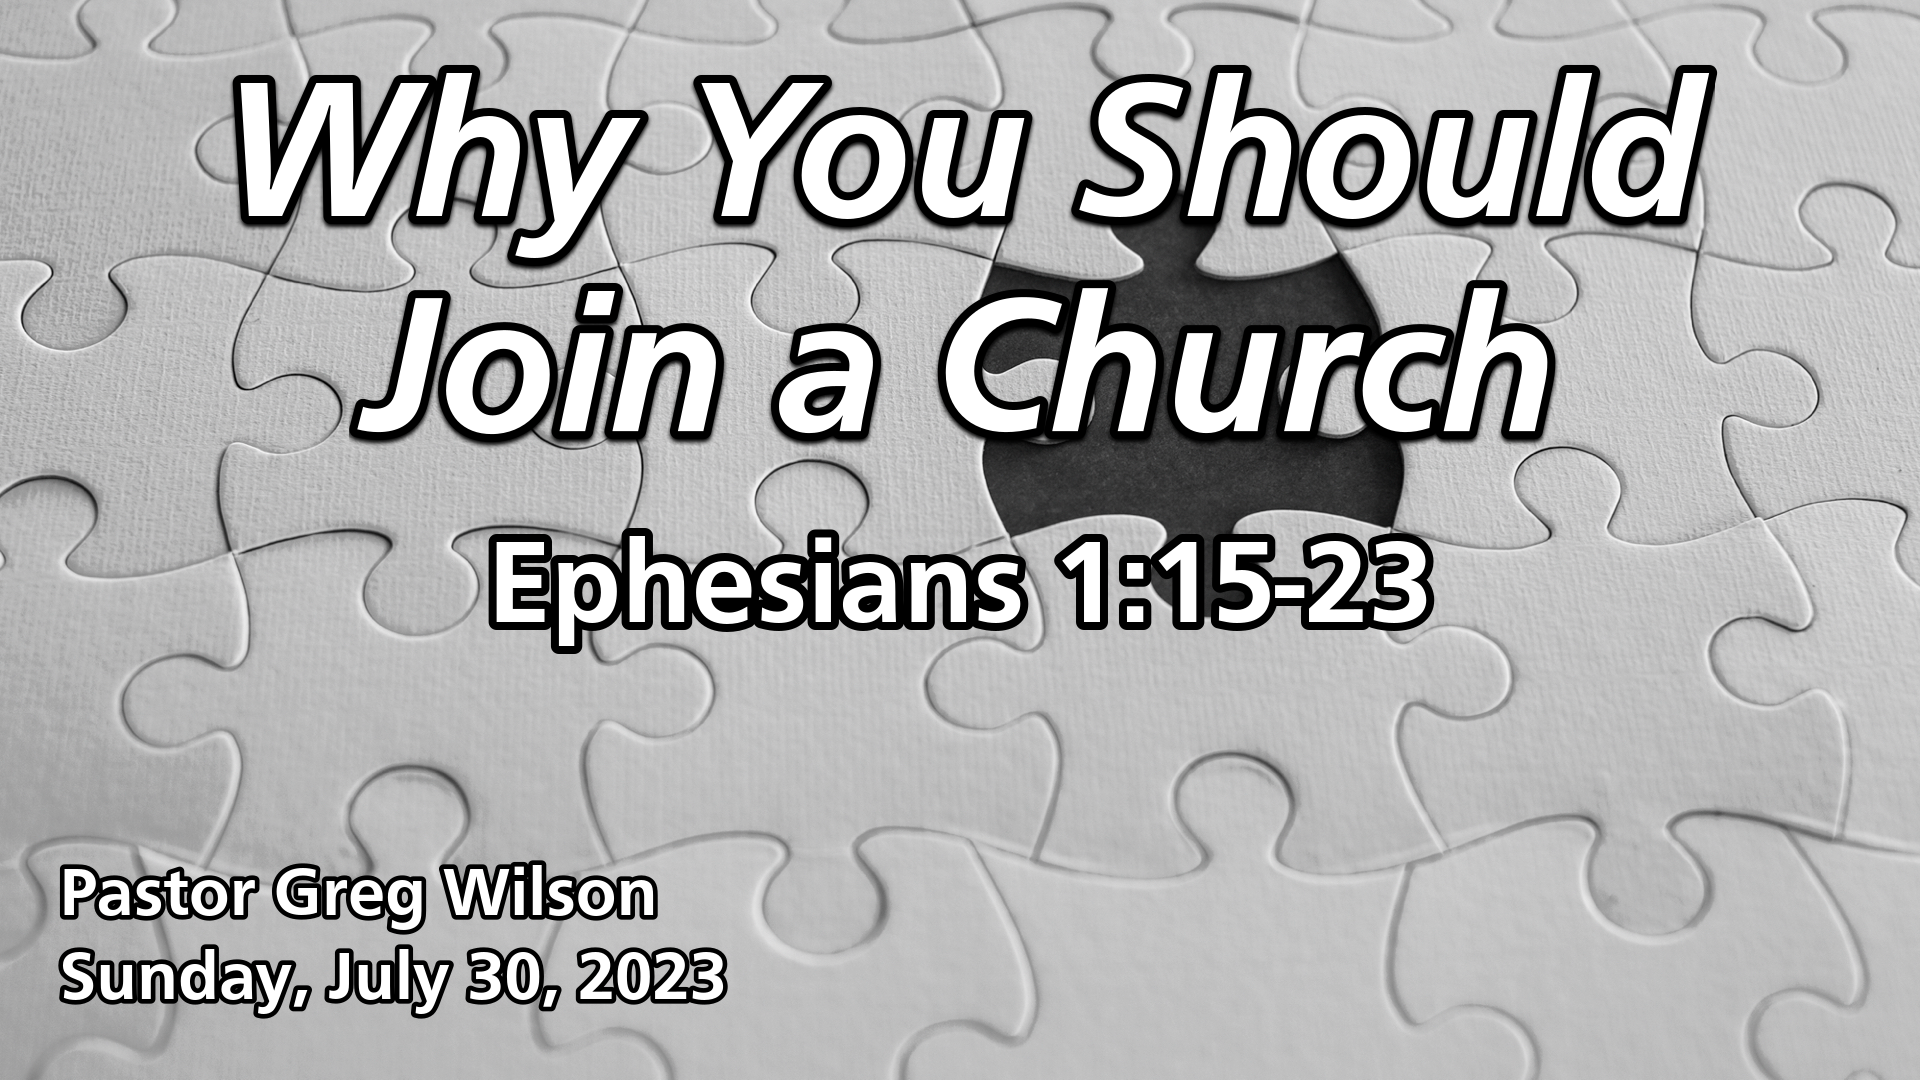 "Why You Should Join a Church"